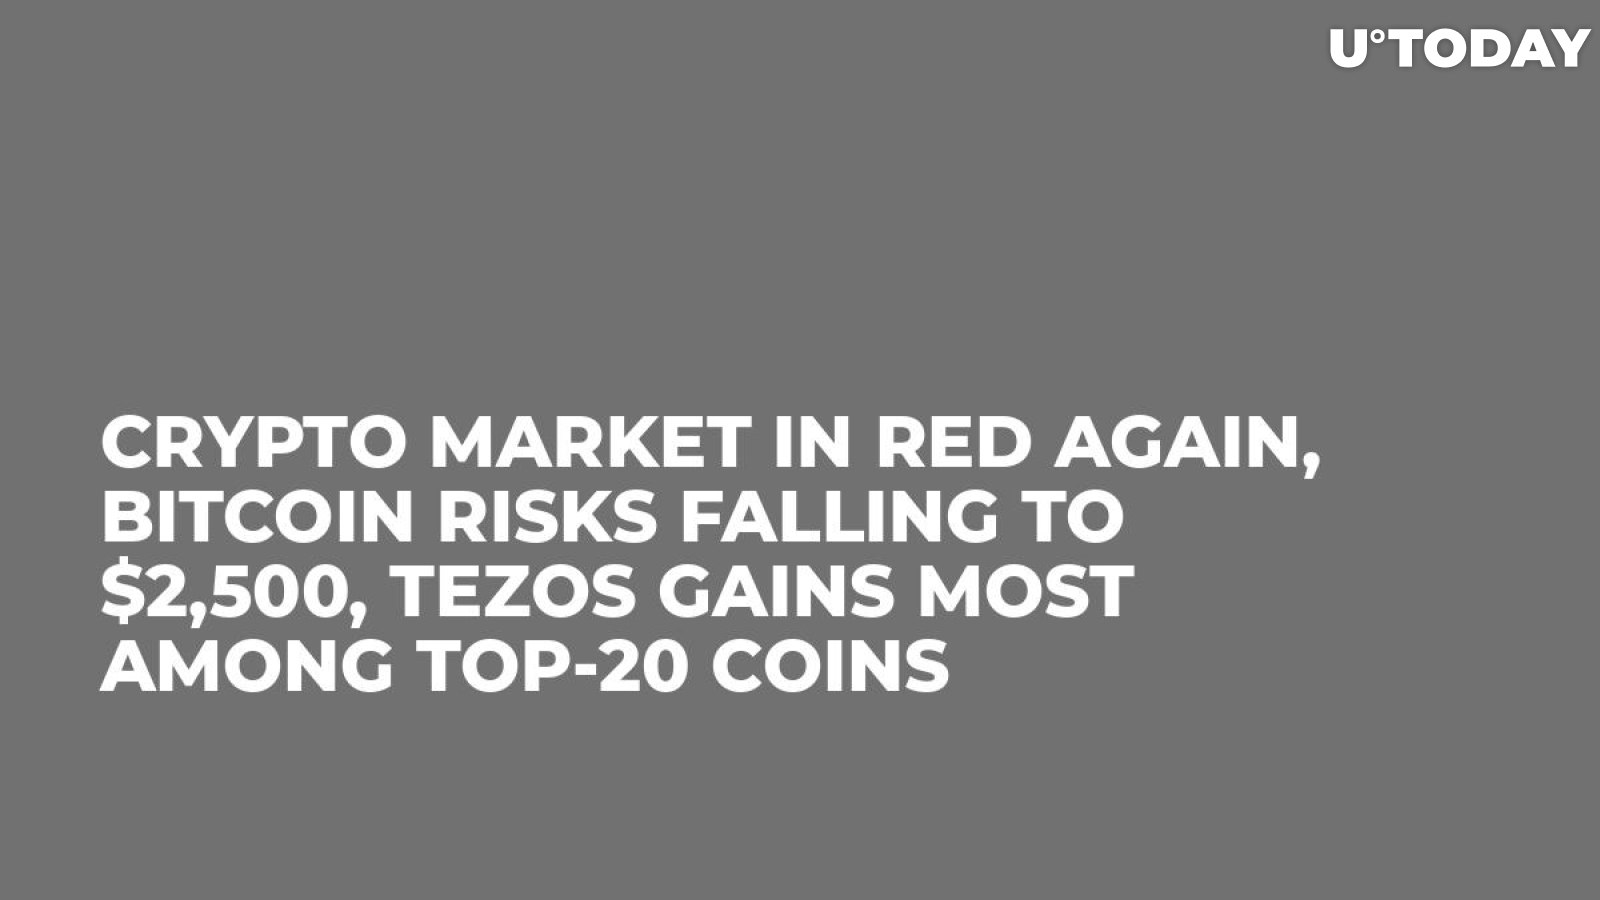 Crypto Market in Red Again, Bitcoin Risks Falling to $2,500, Tezos Gains Most Among Top-20 Coins